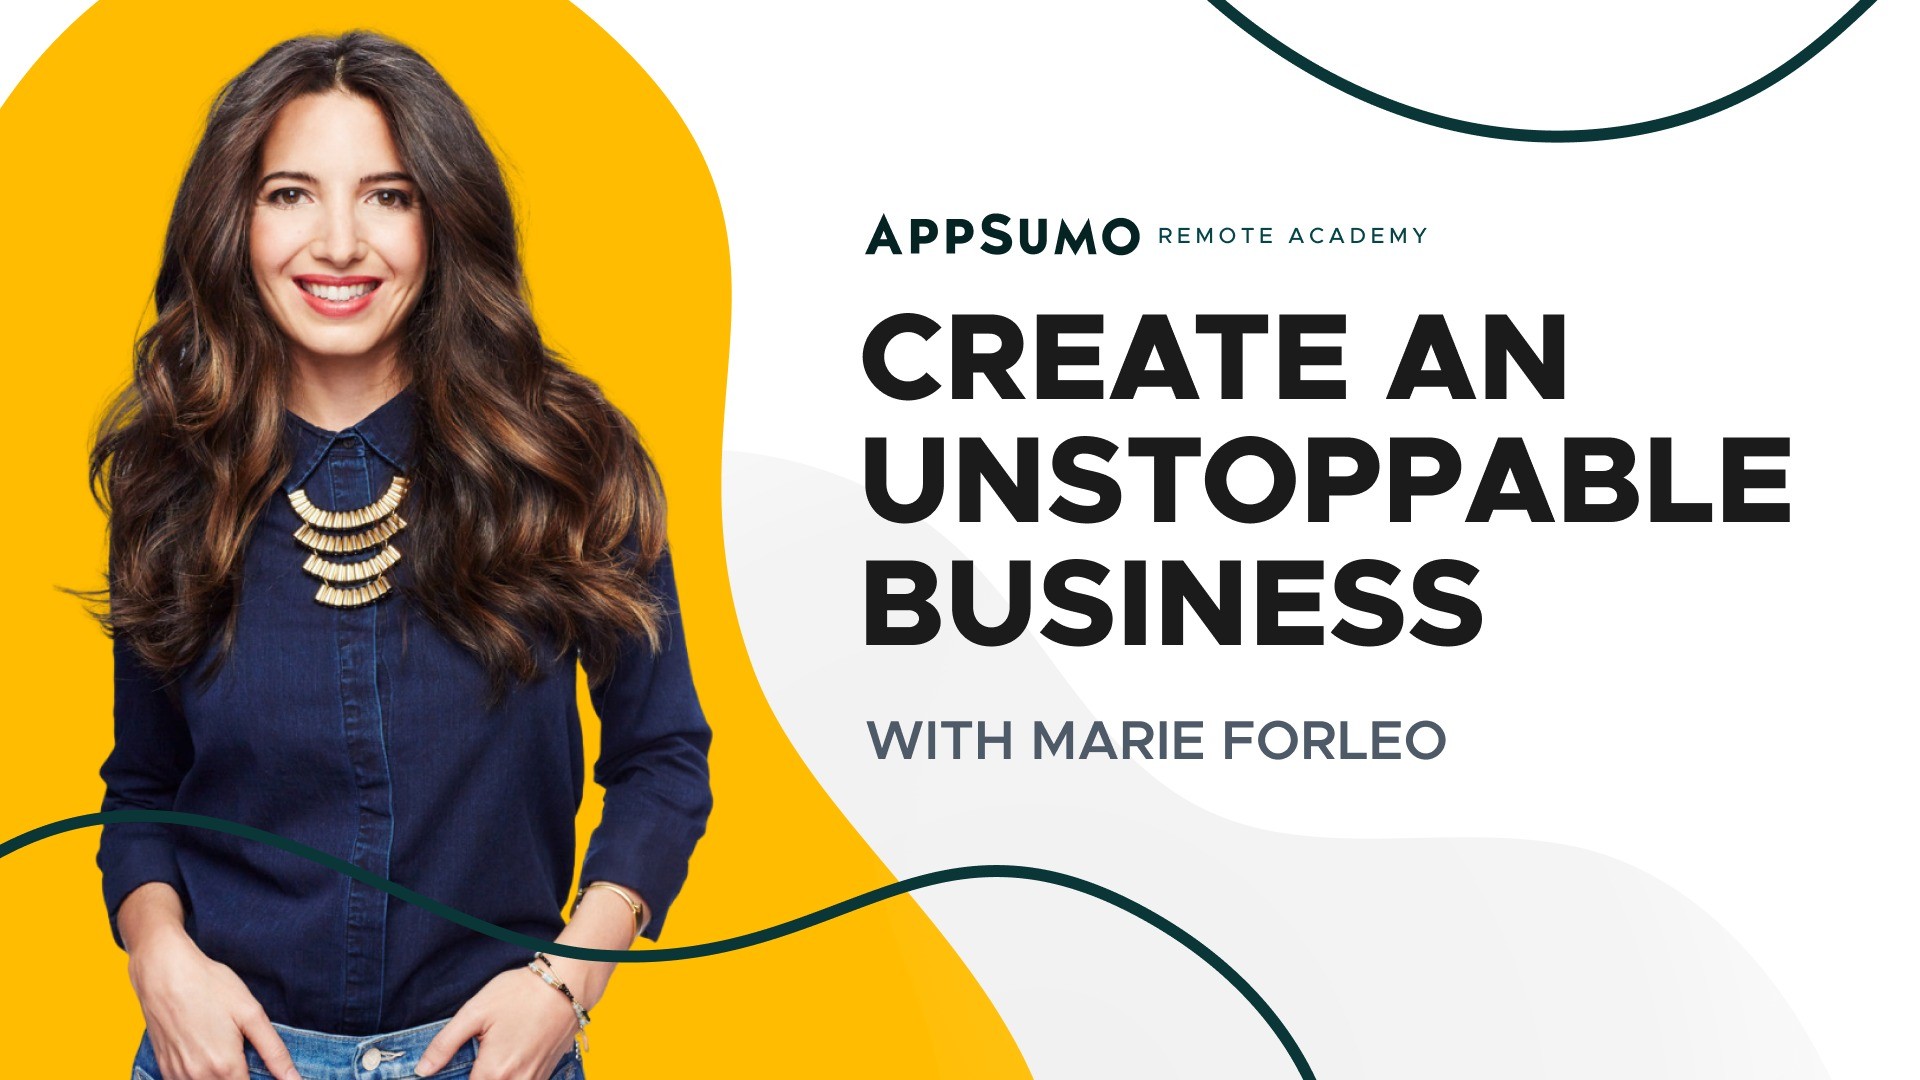 AppSumo Deal for Remote Work Academy: Create an Unstoppable Business - Plus exclusive